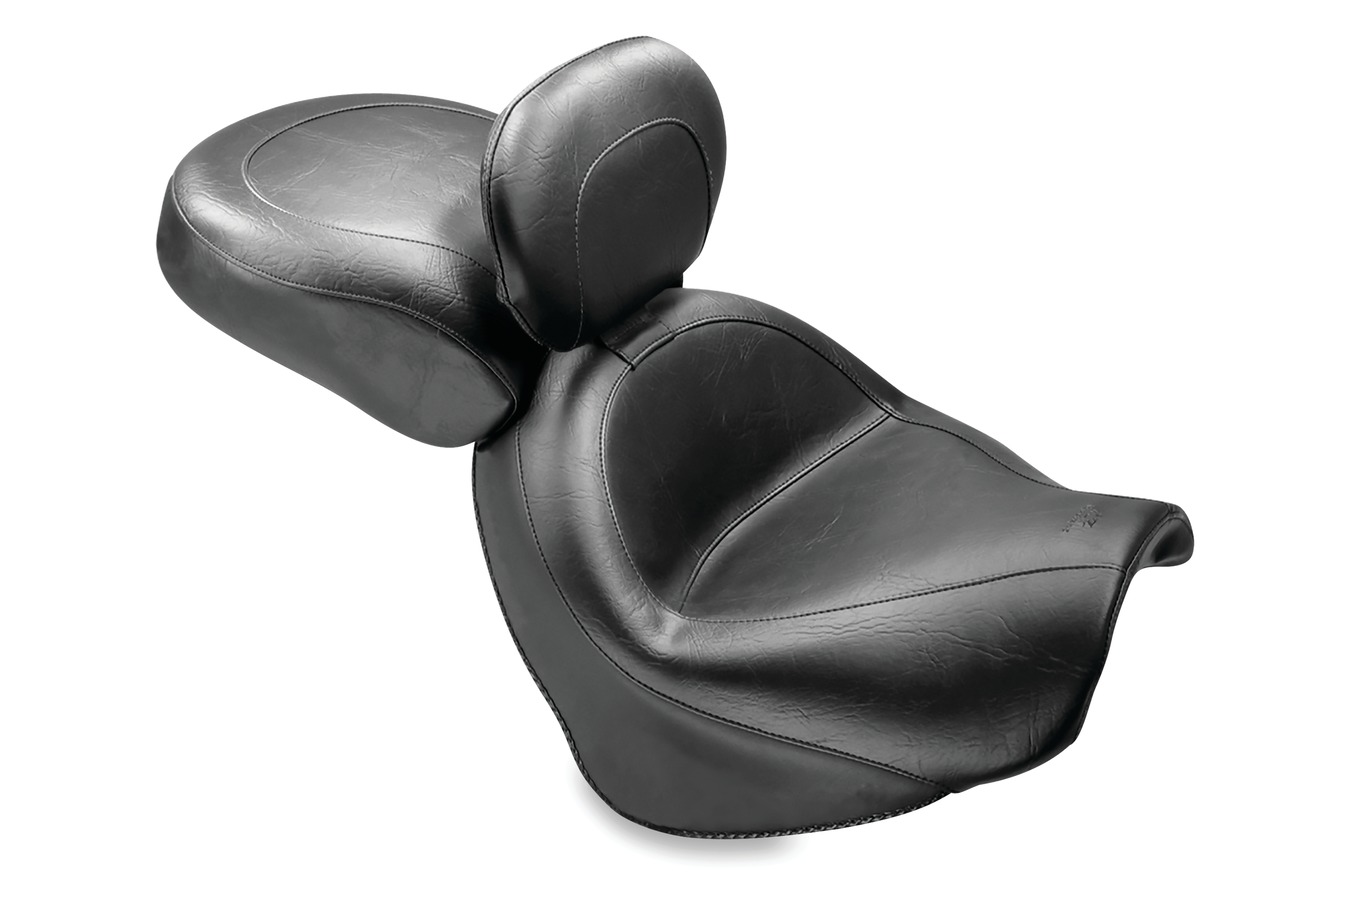 Standard Touring Two-Piece Seat with Driver Backrest for Suzuki Boulevard C50 2005-